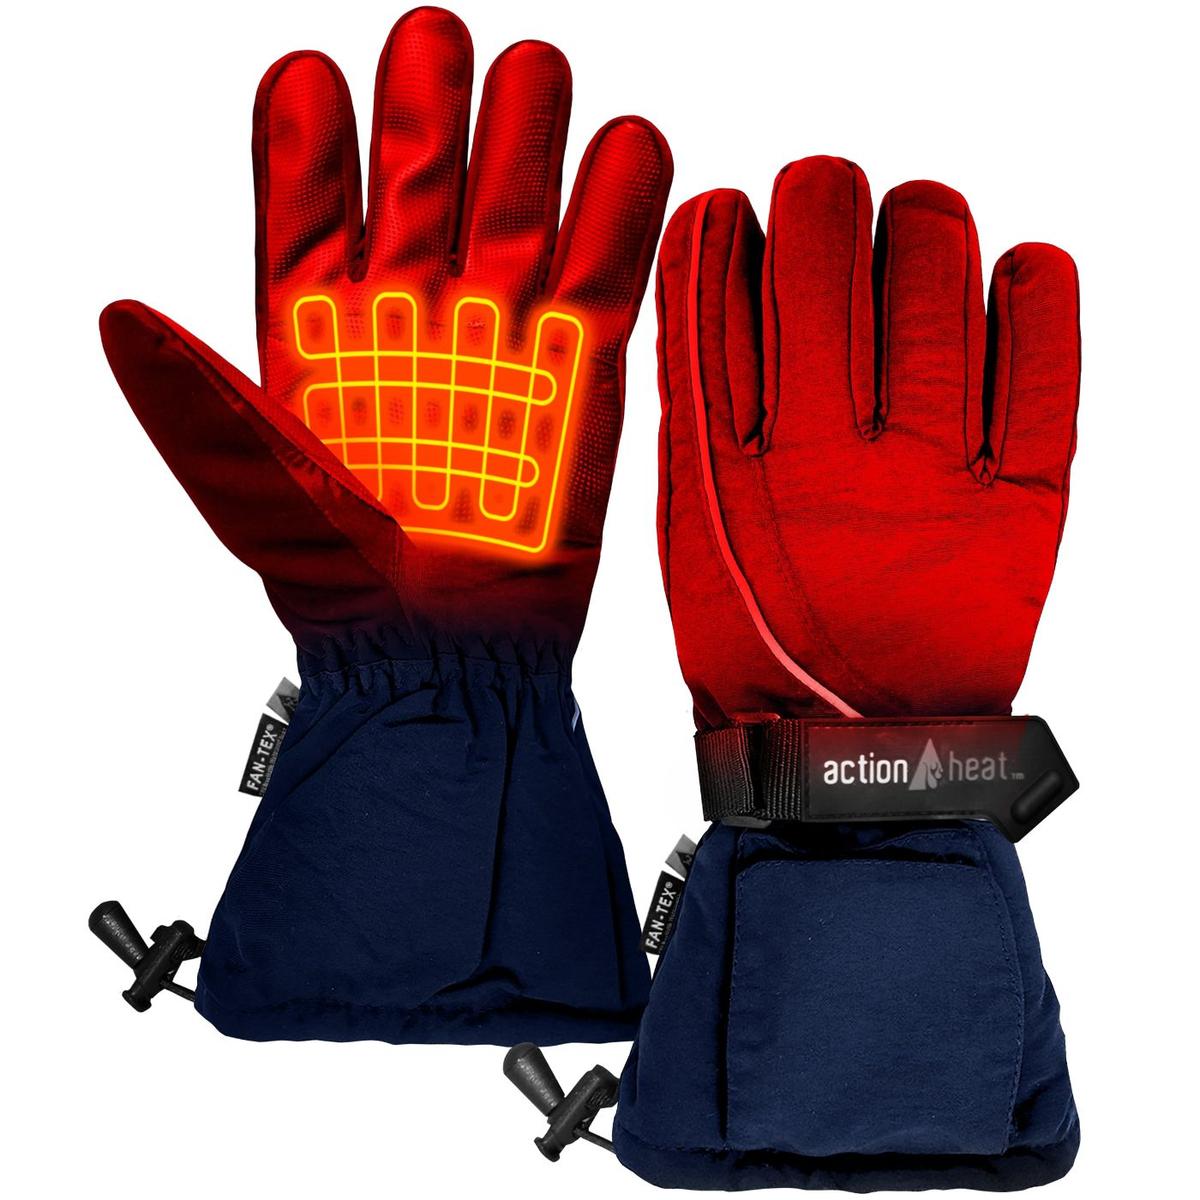 3 Gear Electric Heated Gloves 10000mAh USB Rechargeable